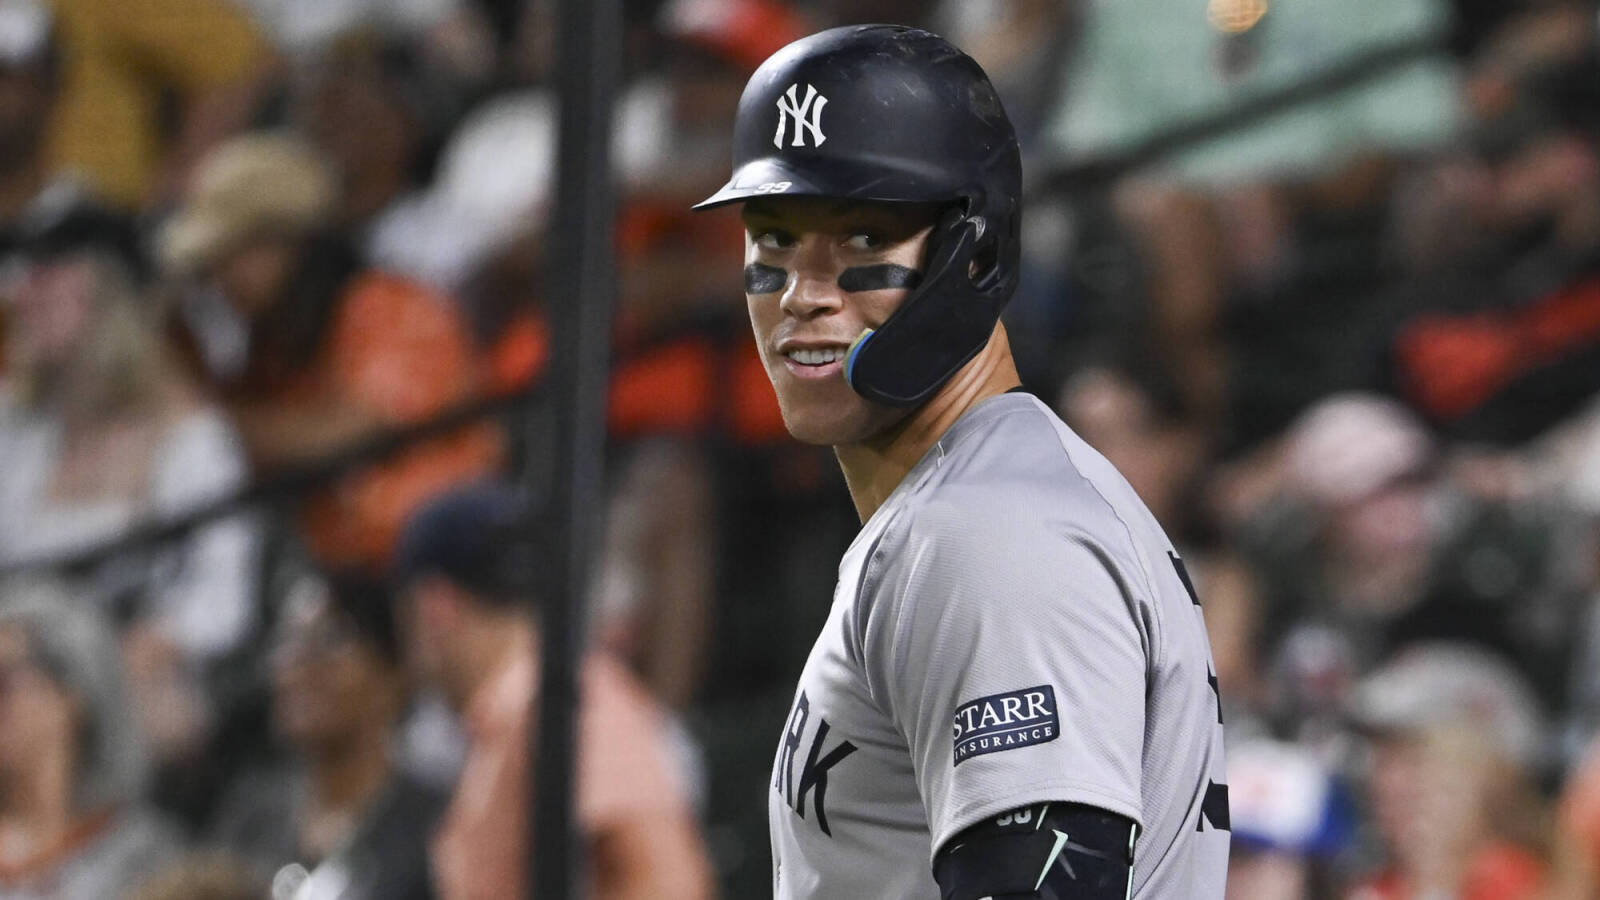 Yankees' Aaron Judge may be 'locked in' and out of slump